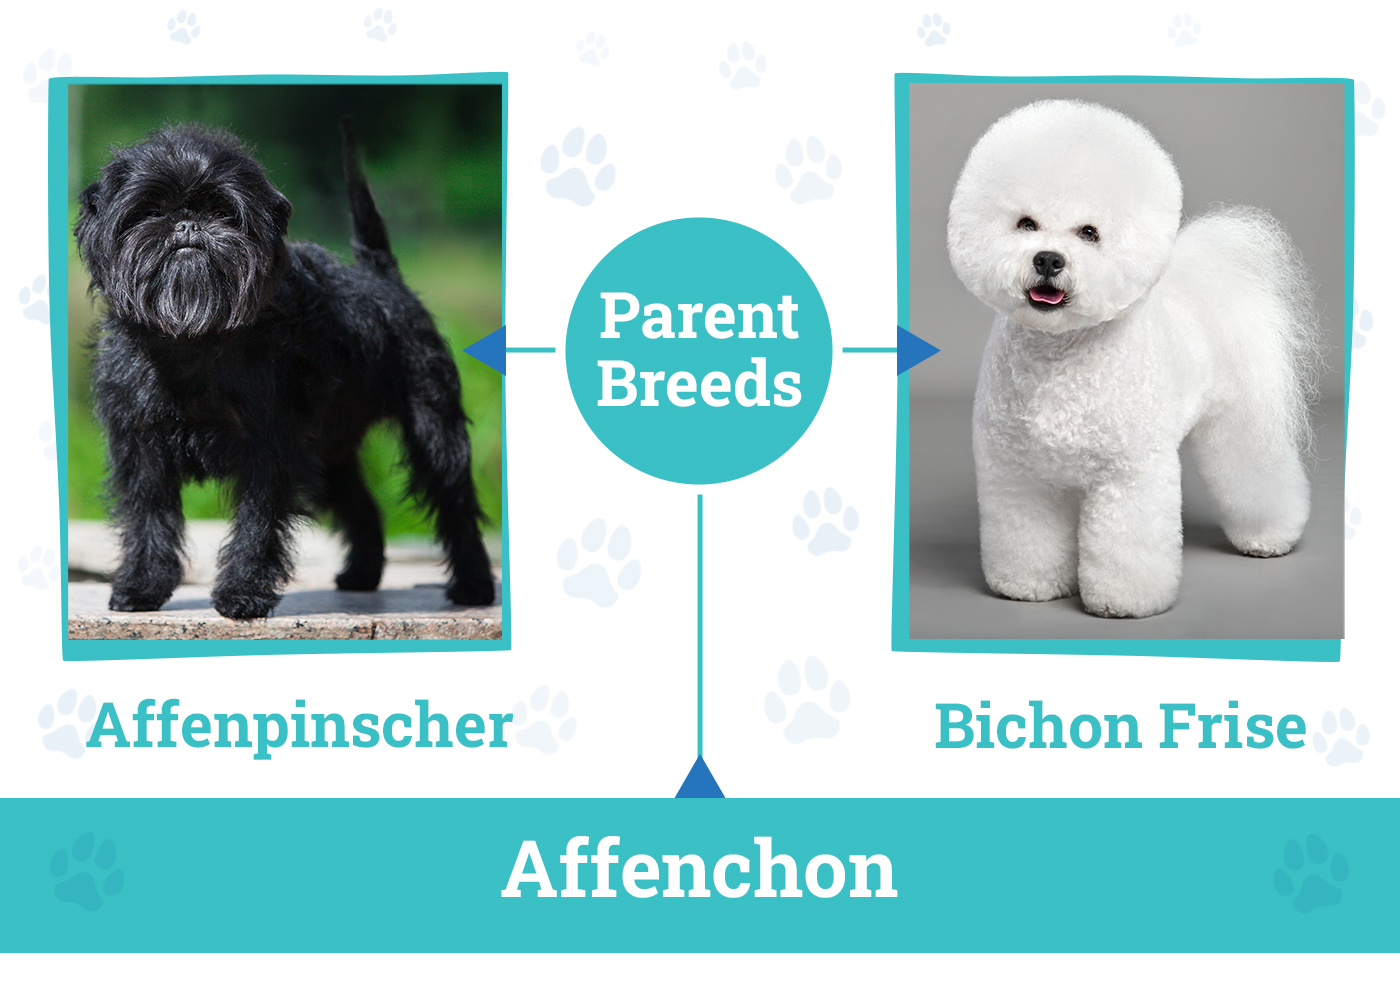 Parent Breeds of the Affenchon